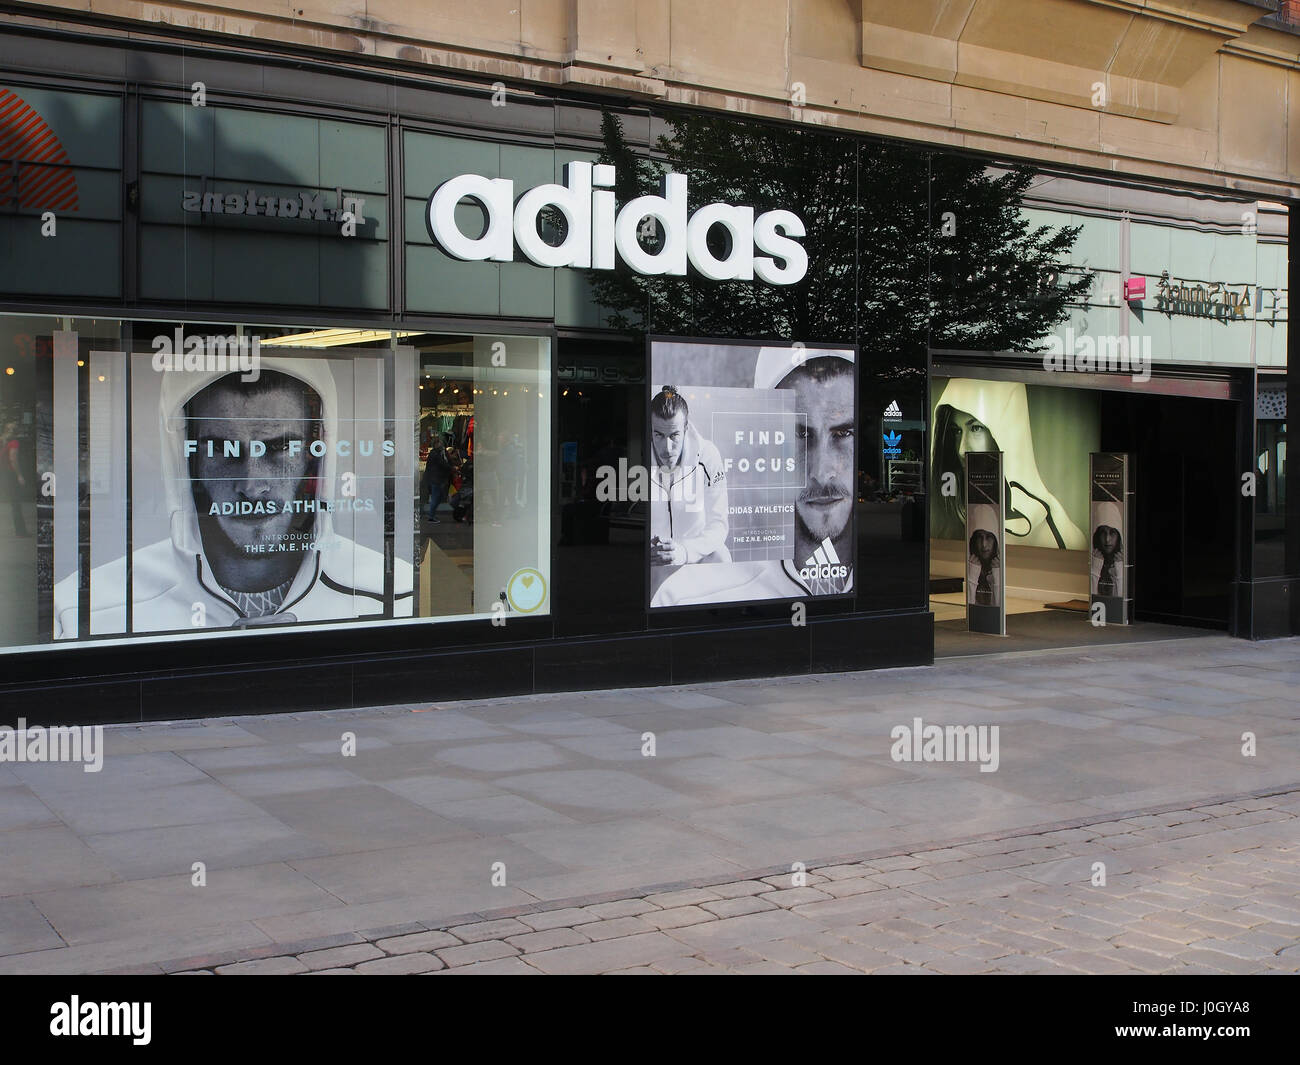 Adidas advertising High Resolution Stock Photography and Images - Alamy